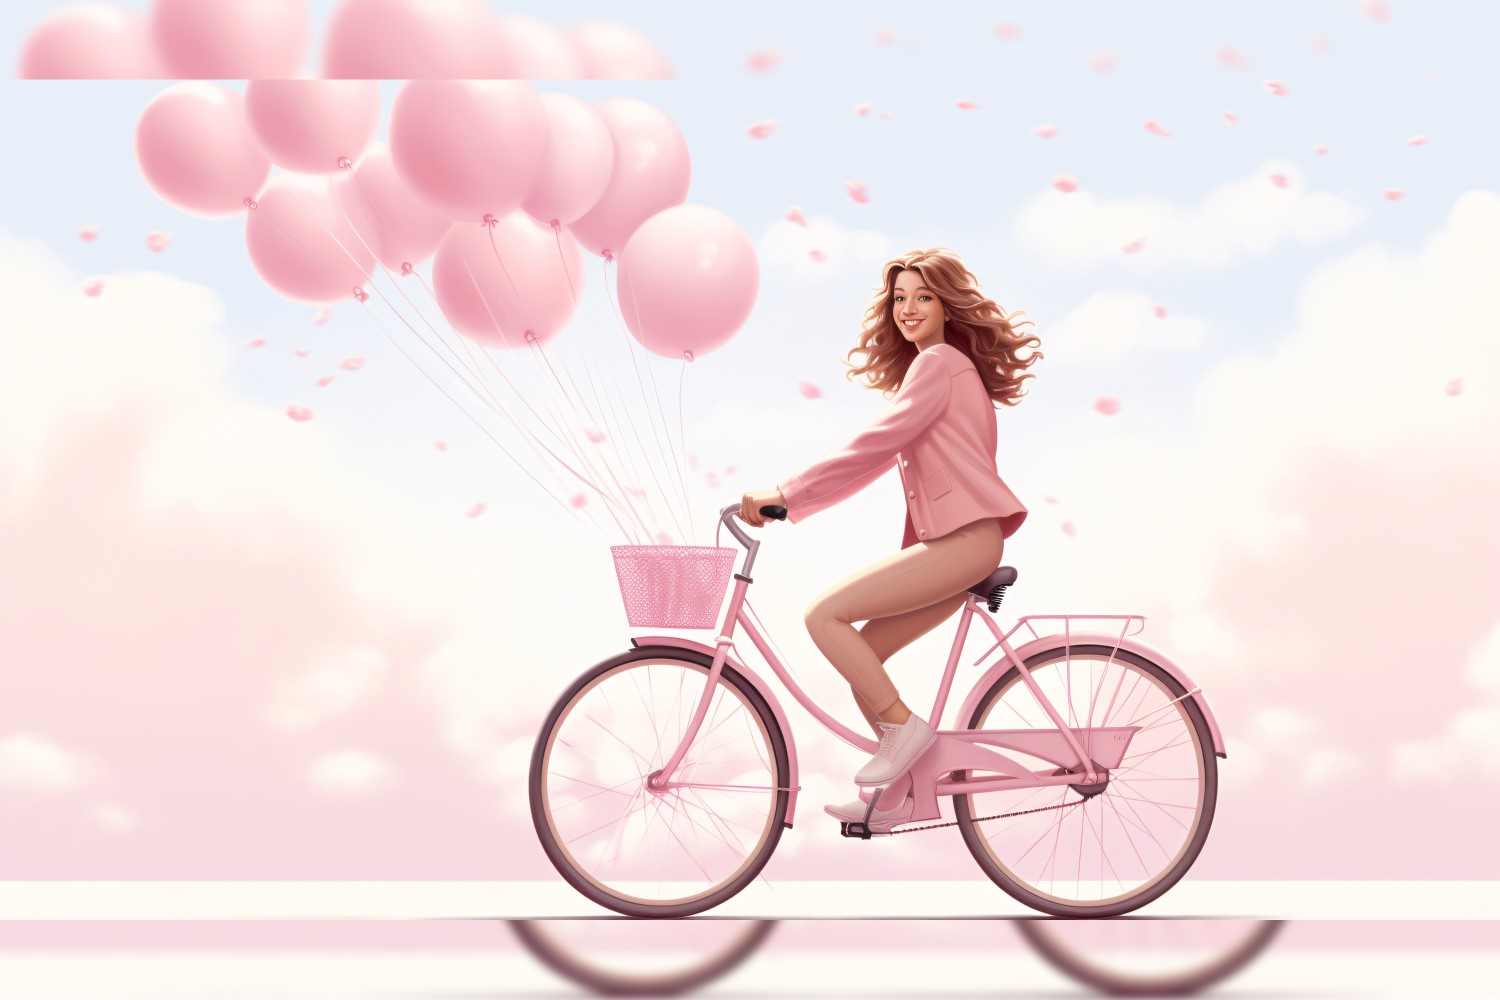 Girl on Cycle with Pink Balloon Celebrating Valentine day 30